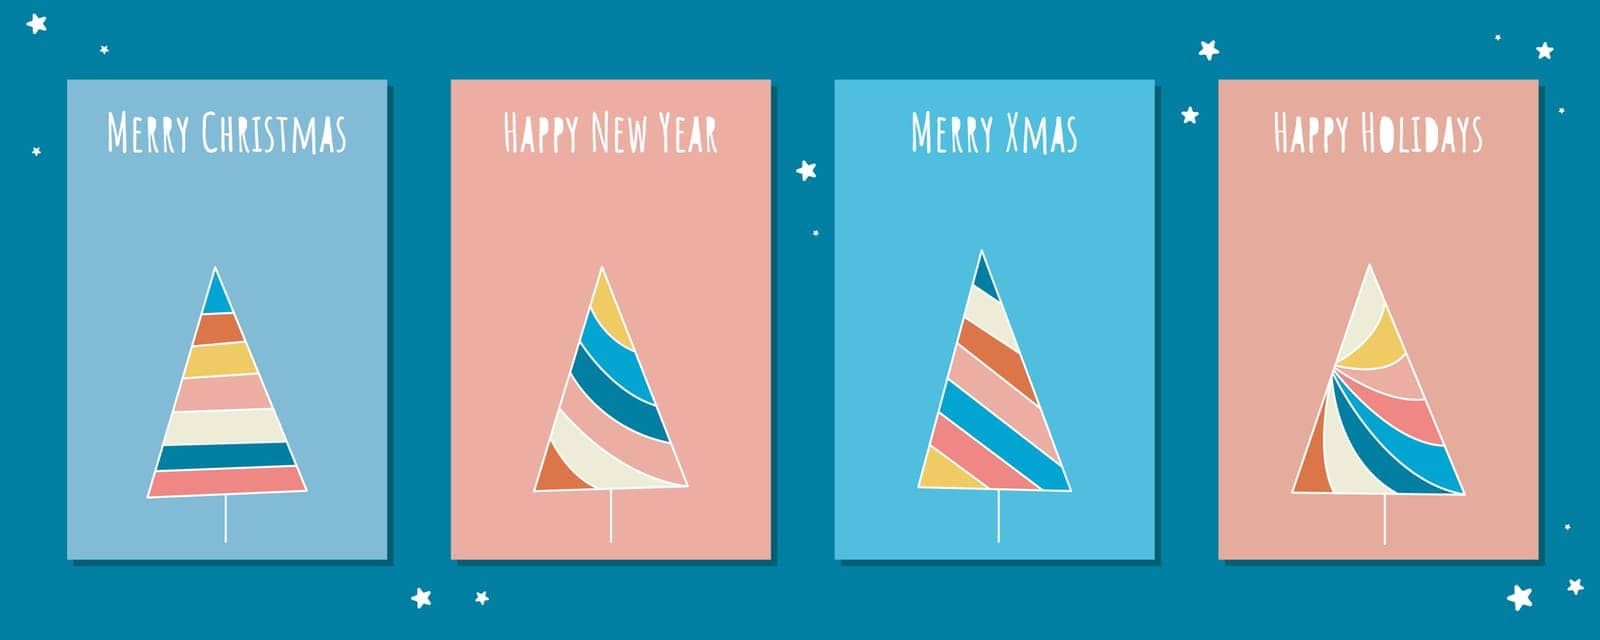 Festive Christmas cards set. Cute cards with modern geometric Christmas trees and lettering. Merry Christmas, Happy New Year, Happy Holidays lettering. Bunch of congratulations, vector illustration